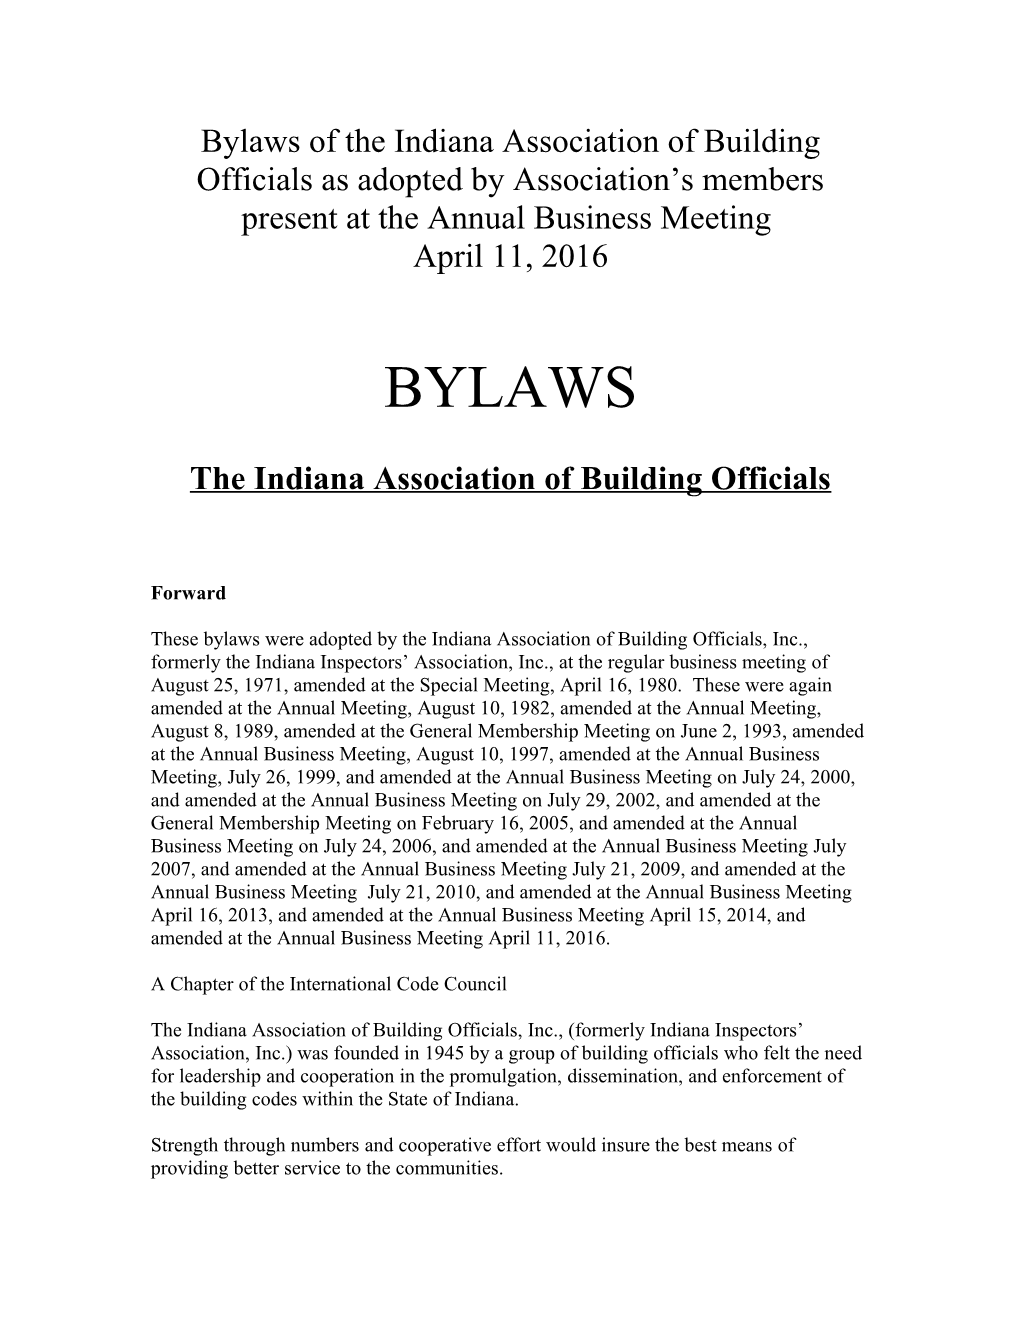 The Indiana Association of Building Officials